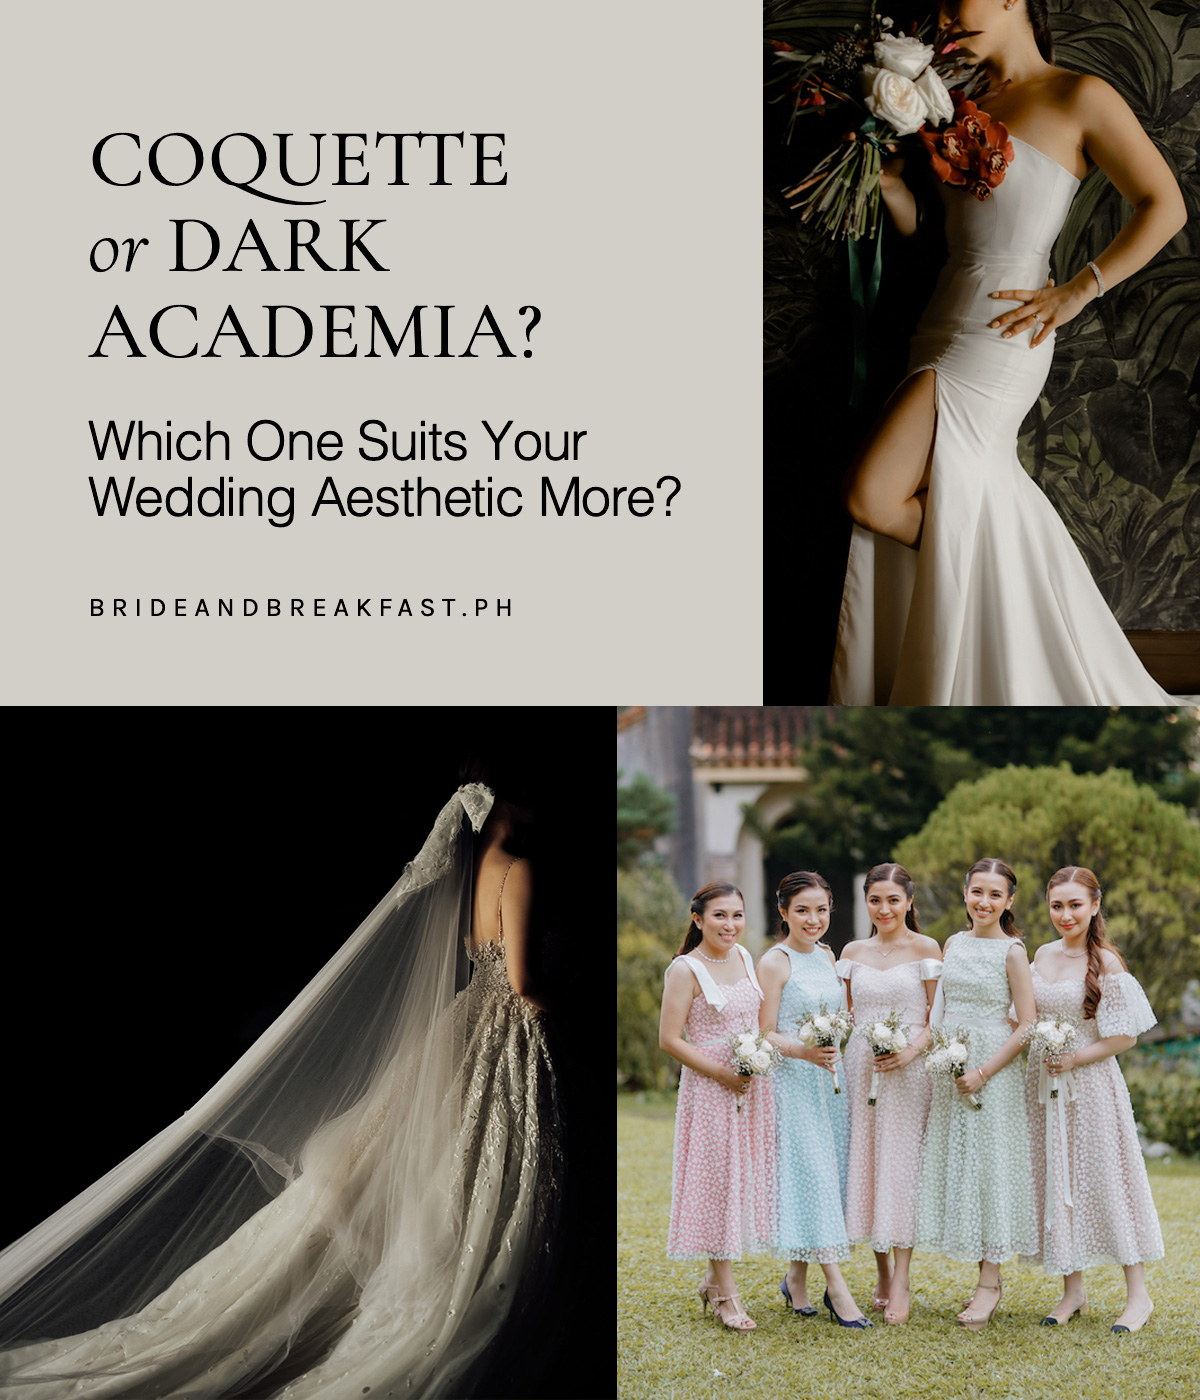 Coquette or Dark Academia: Which One Suits Your Wedding Aesthetic More?